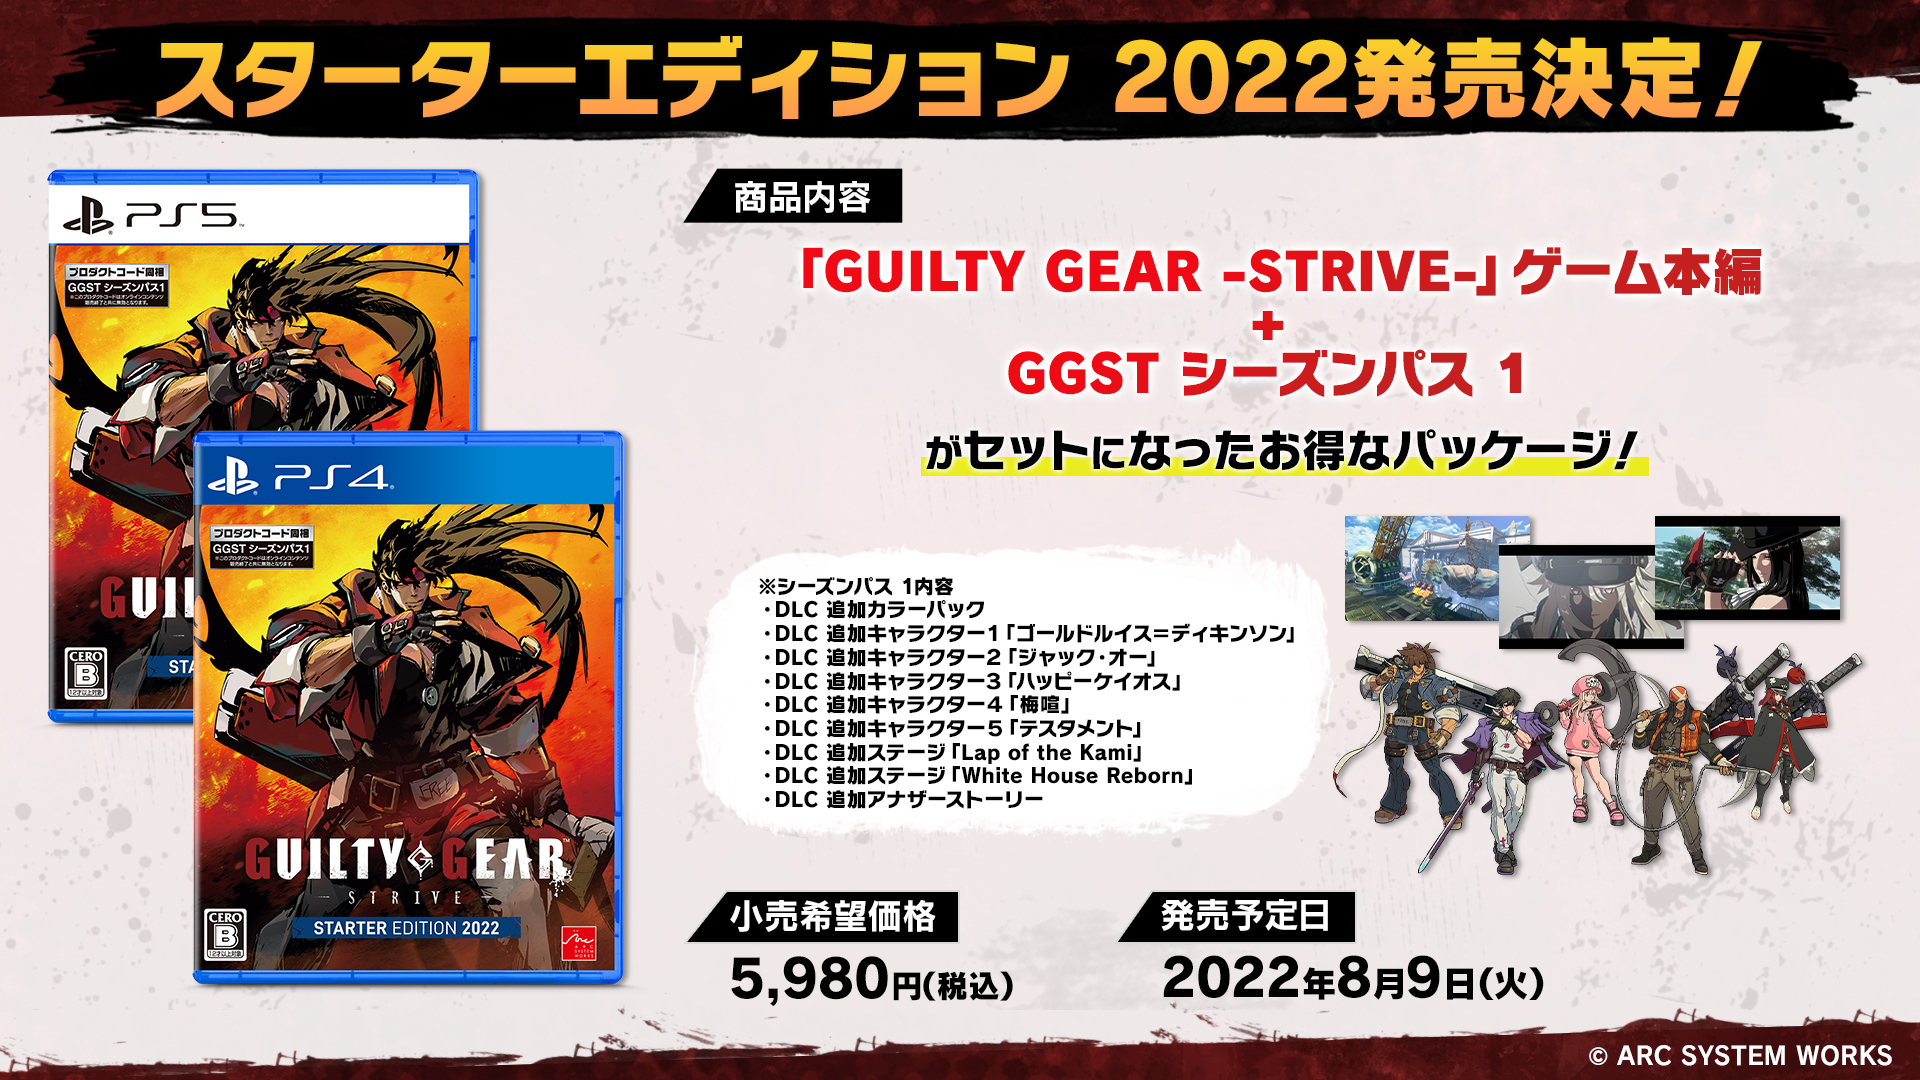 Guilty Gear Strive Starter Edition 2022, largescale balance update